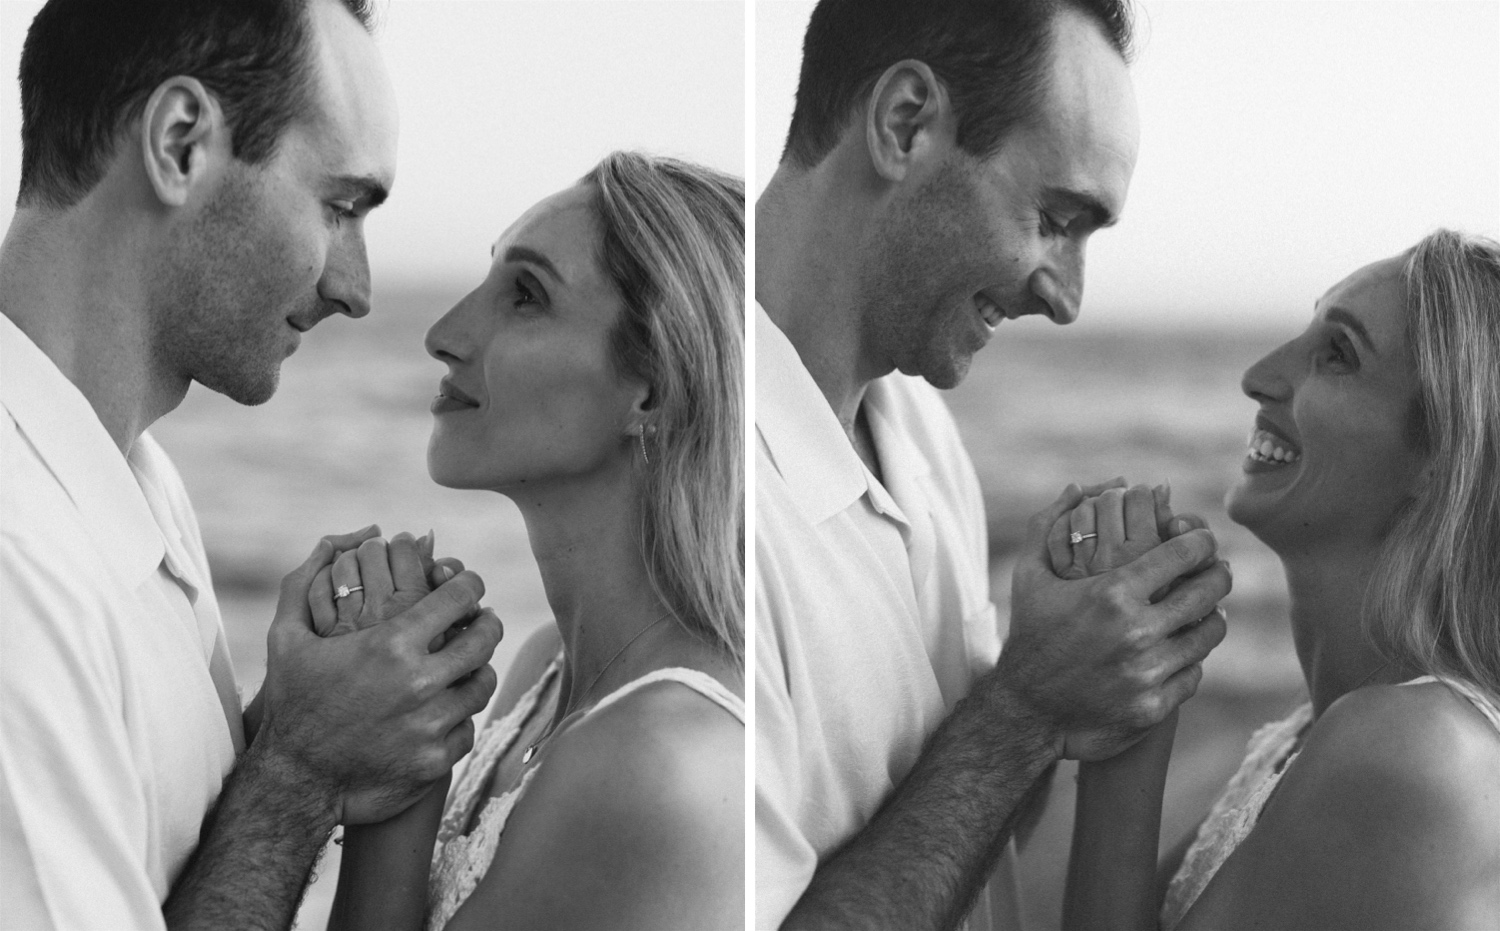 socal sunset beach engagement session photographed by Hanna Walkowaik